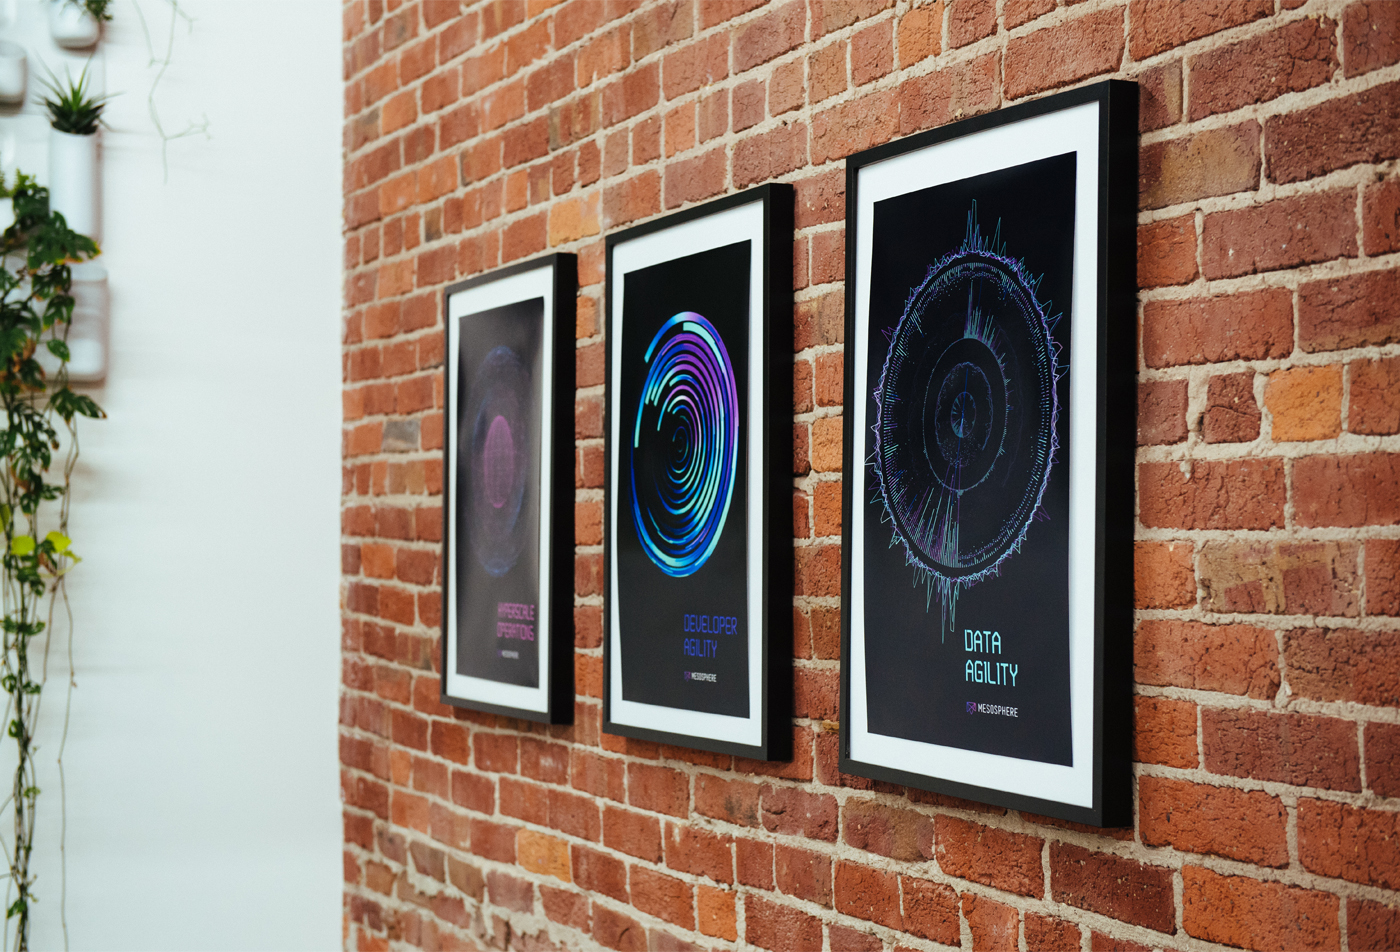 Mesosphere sphere posters Agility Data center developer scale hyperscale operation speed colours connected graphics